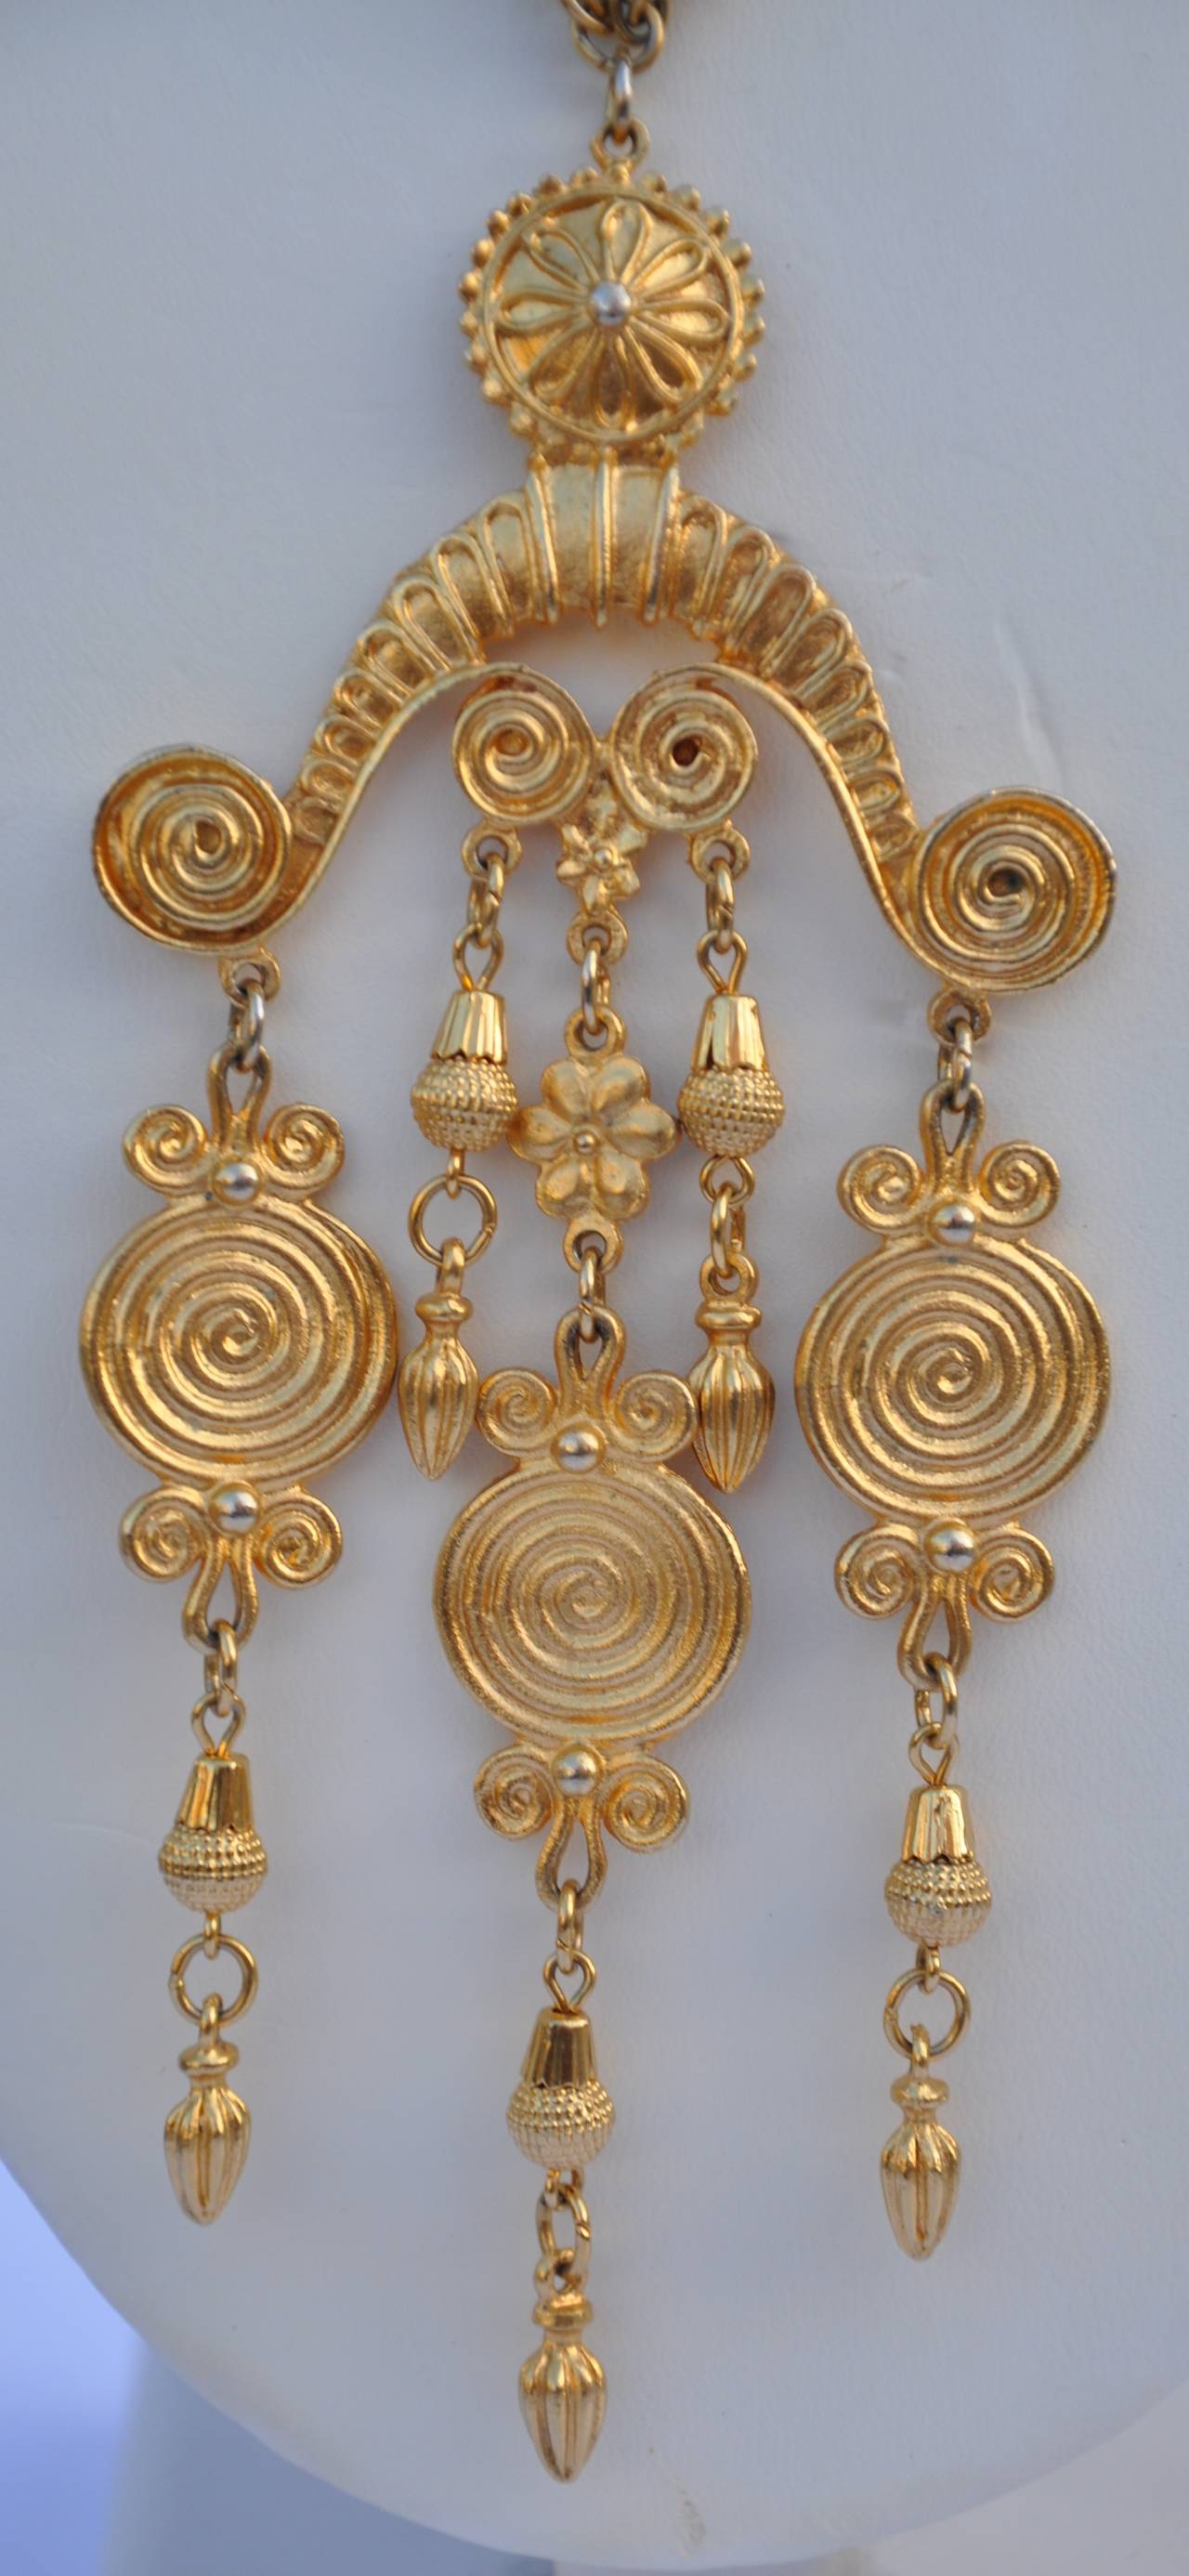 Vendome's wonderfully wicked gold hardware necklace is combined with a huge mobile pendant. This wonderful piece is signed twice, one on the back of the pendant and also on the hook-clasp of the necklace. The necklace measures 19" in length.